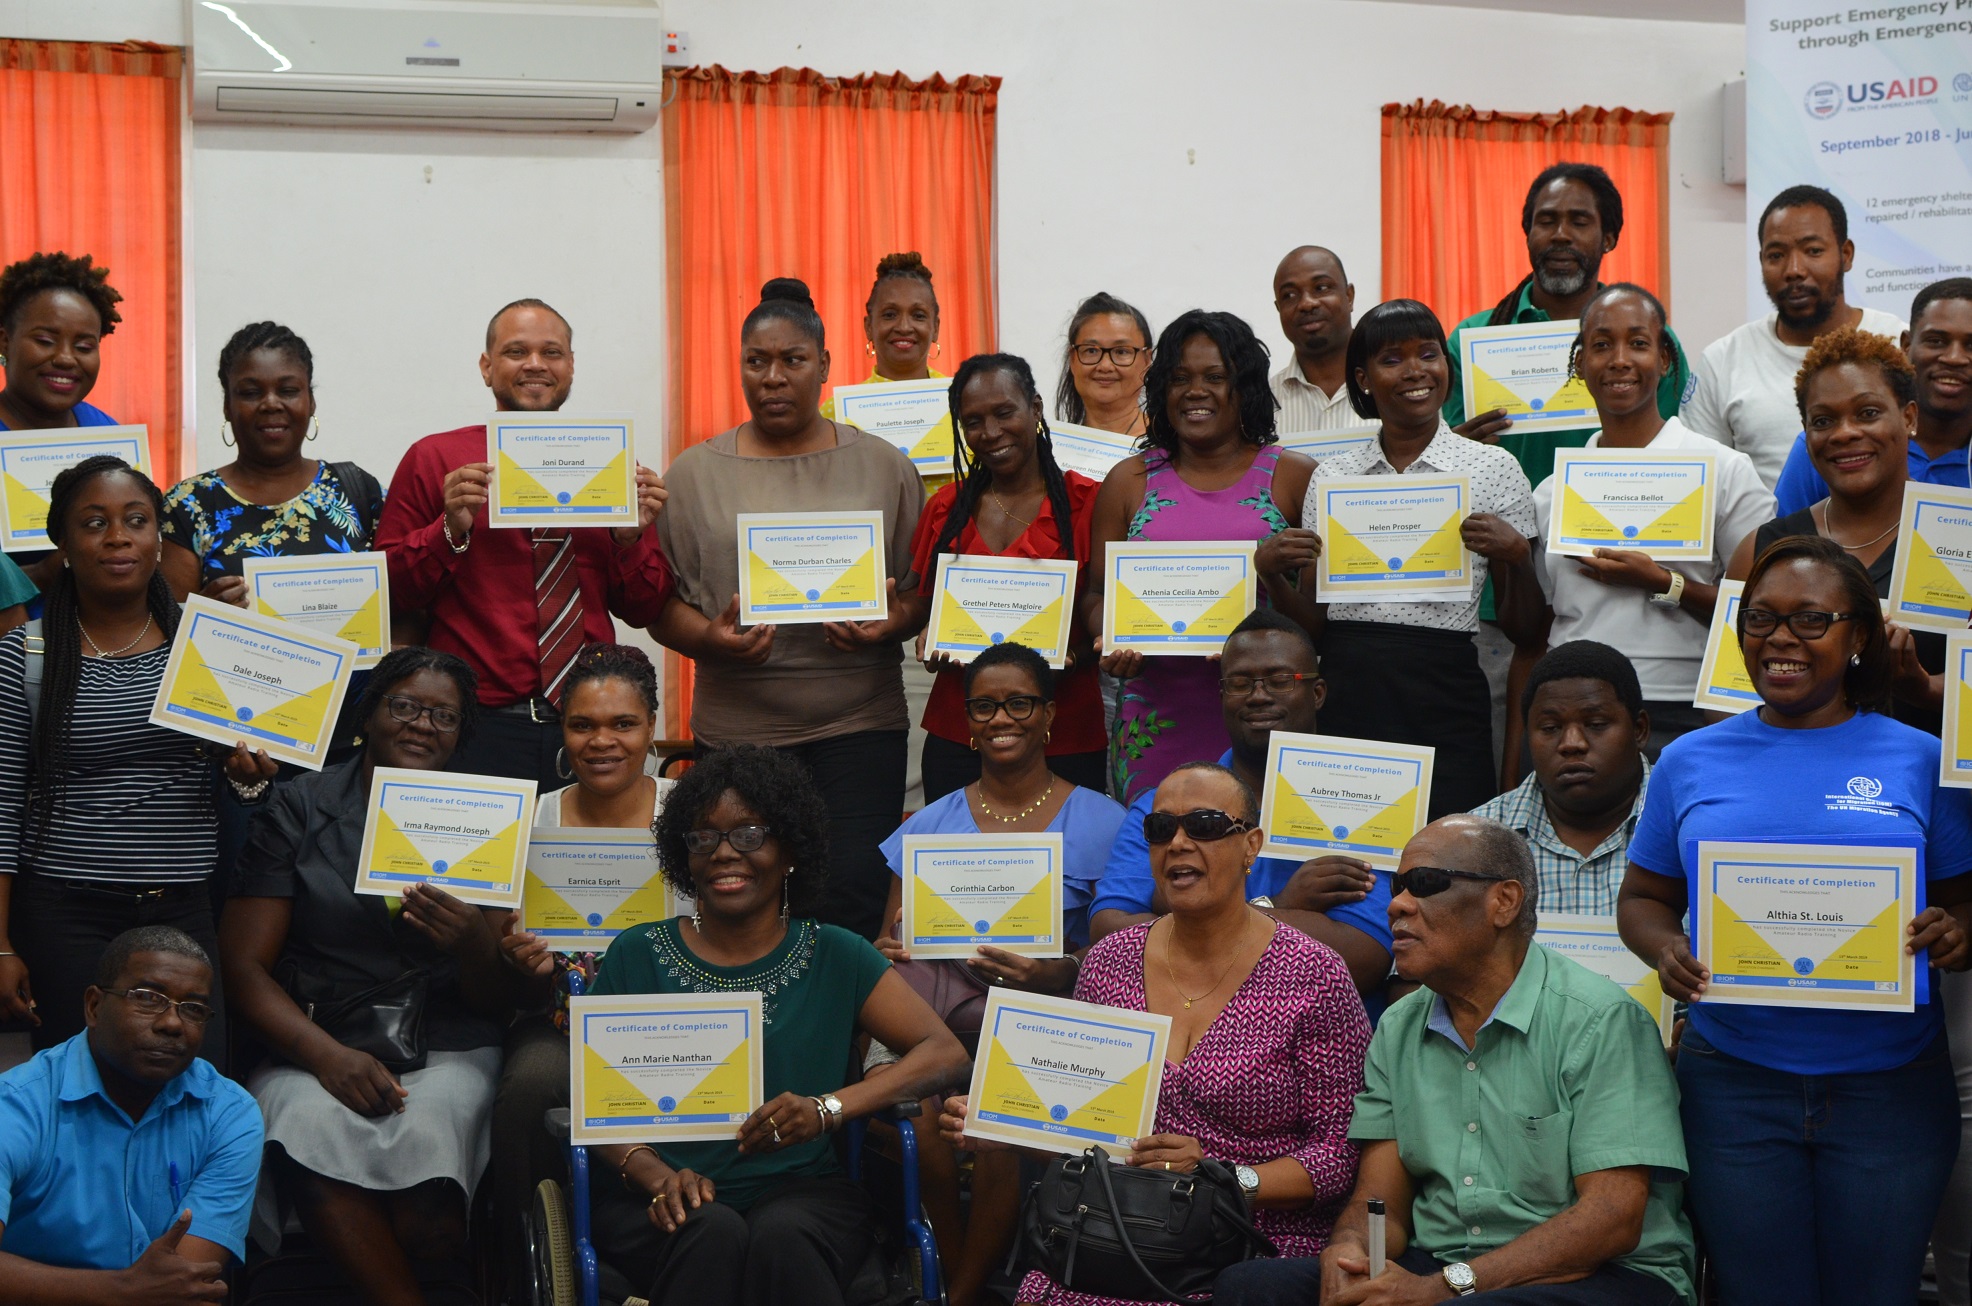  UN Humanitarian Agency assists in Building Capacity for Emergency Preparedness in Dominica